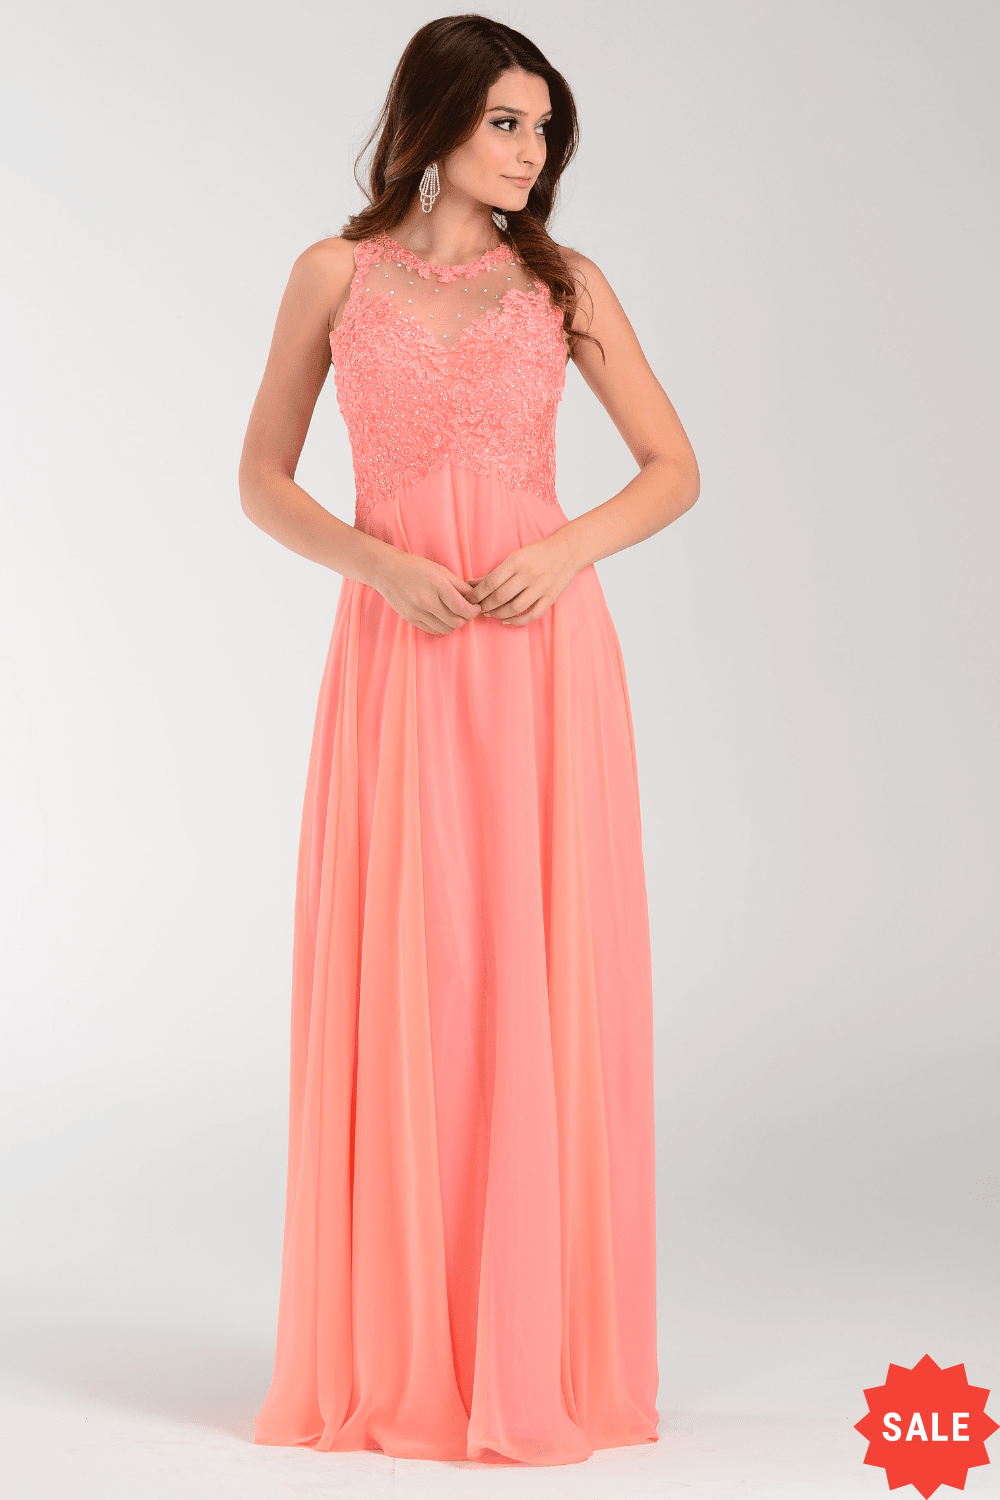 Long Chiffon Dress with Lace Applique Top by Poly USA 7454